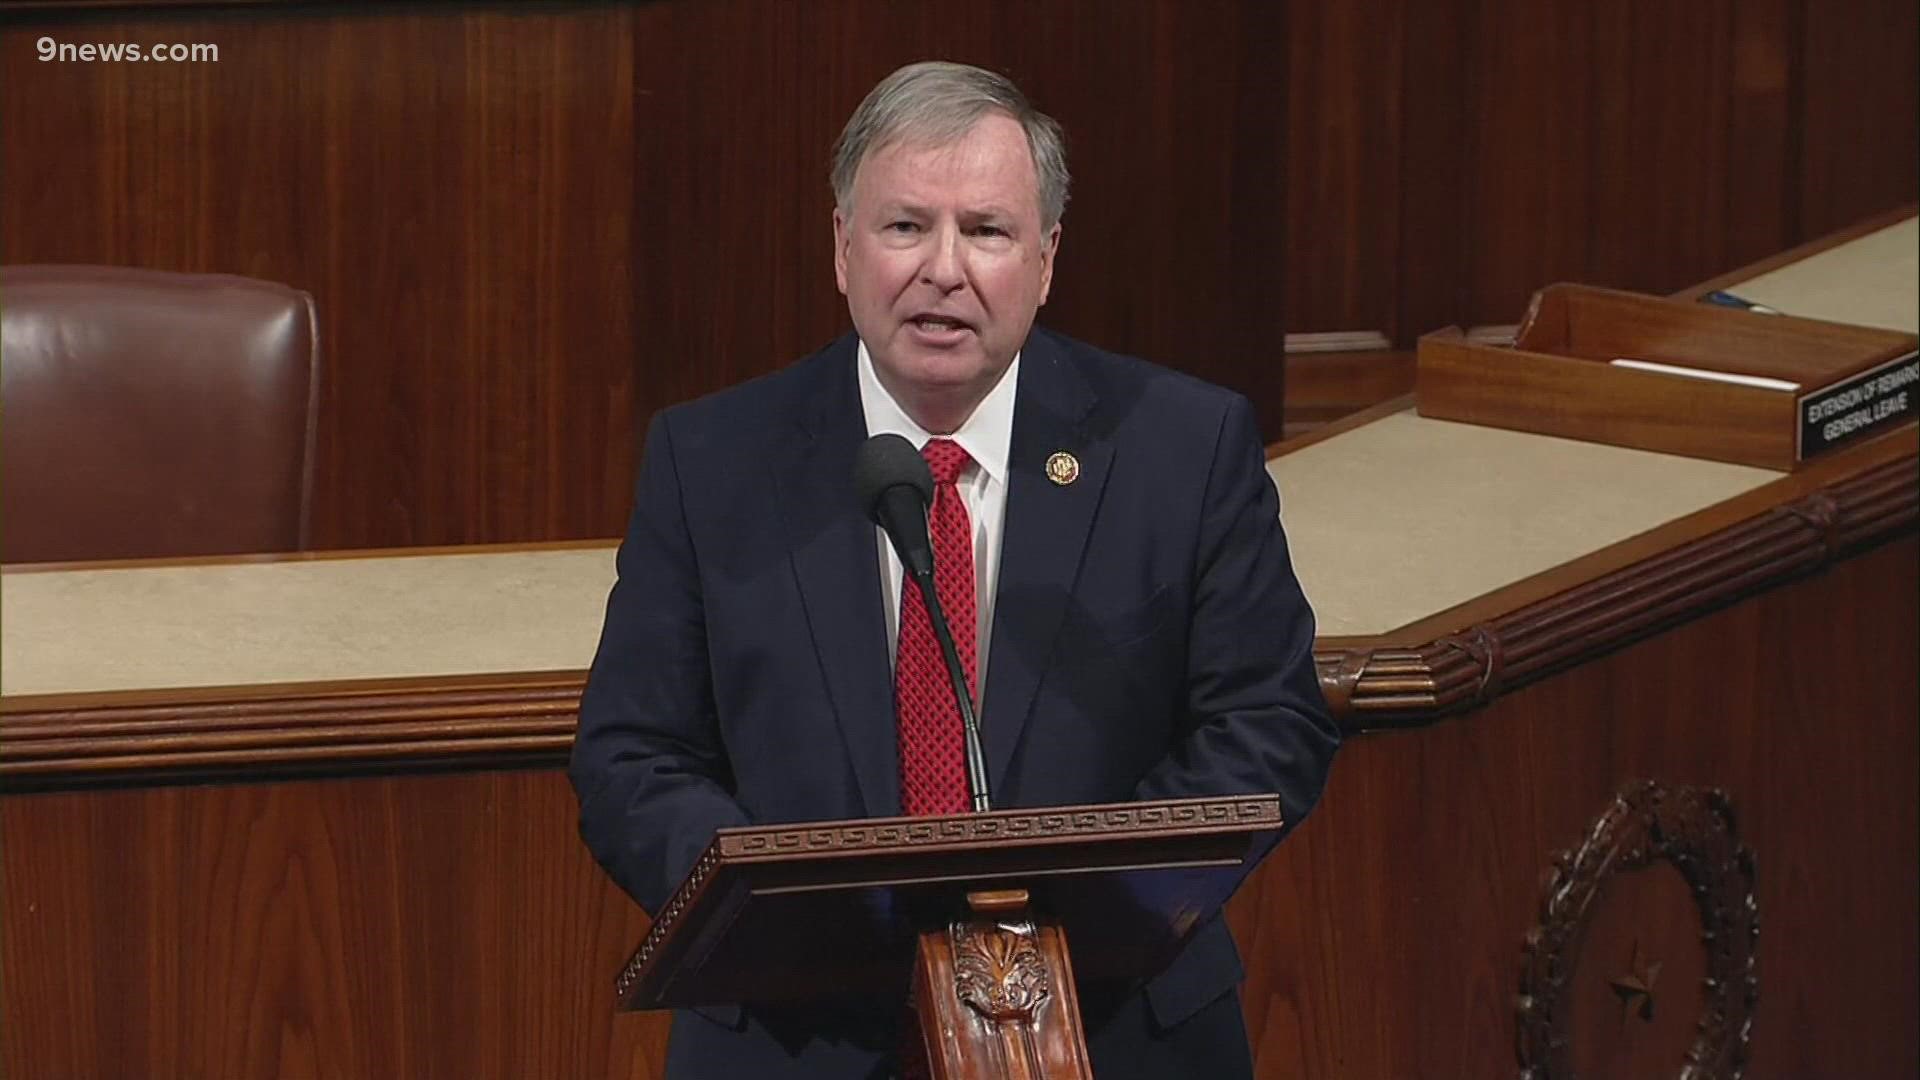 GOP Rep. Doug Lamborn is accused of misusing official resources and soliciting or accepting improper gifts from subordinates.